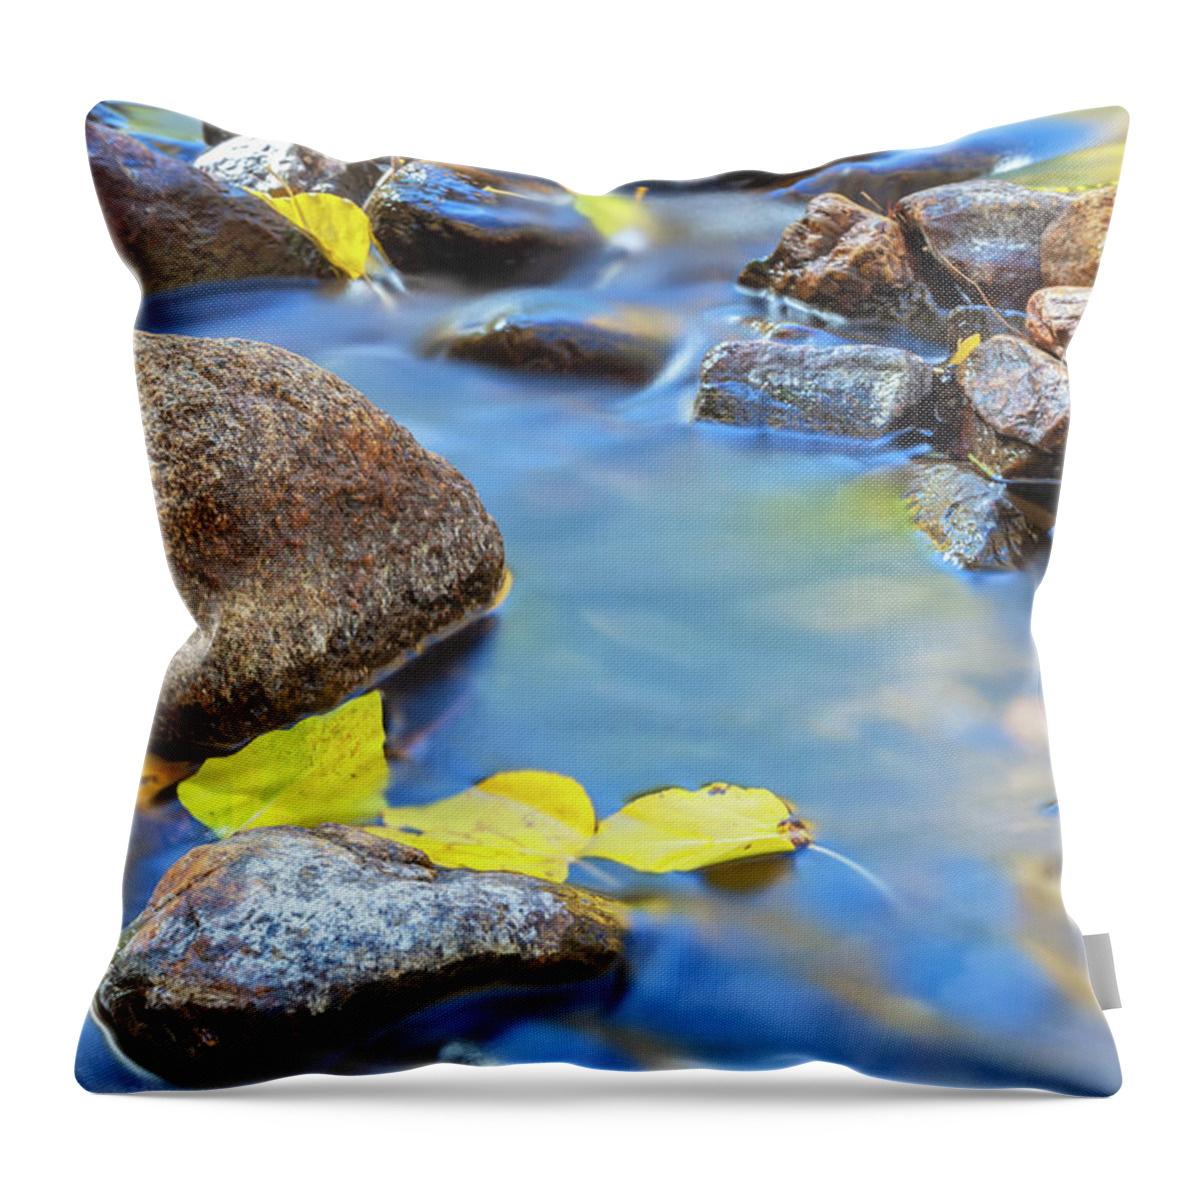 Fall Throw Pillow featuring the photograph Impresions Of Autumn by Jonathan Nguyen